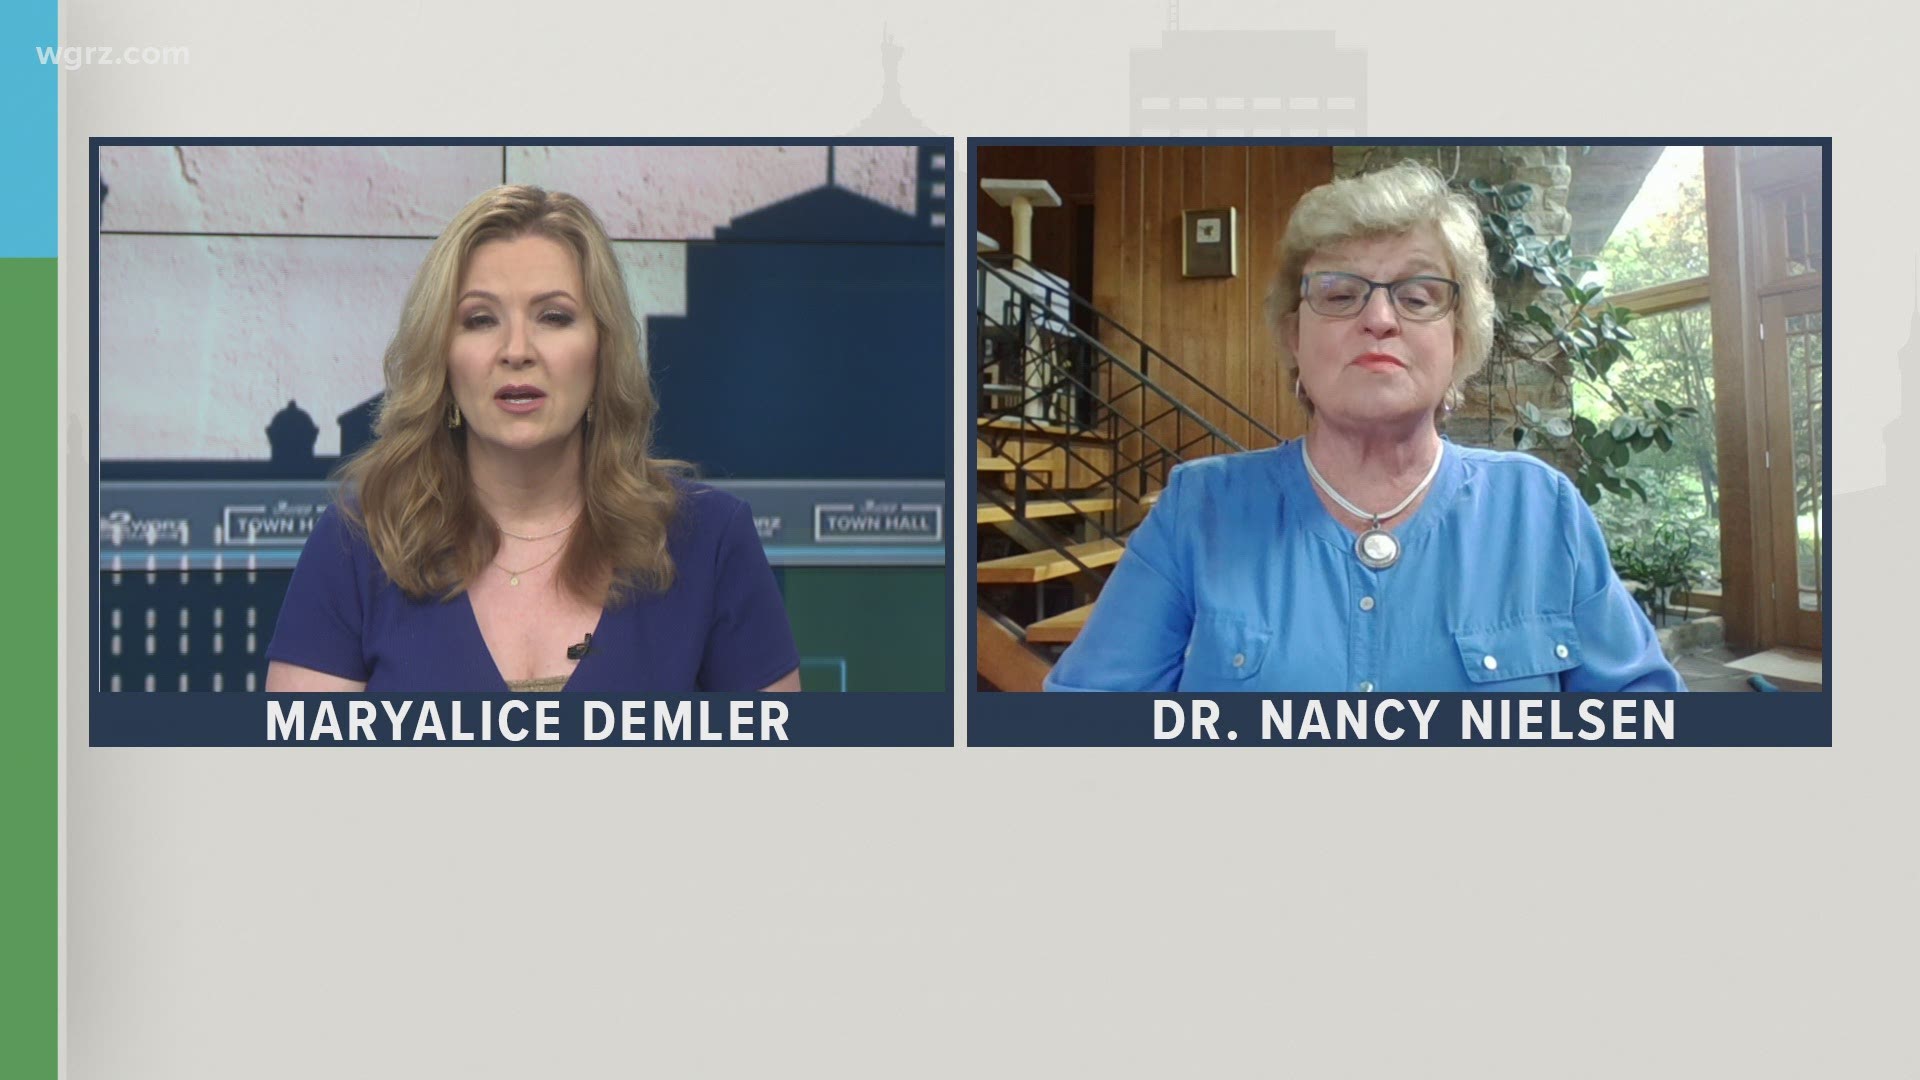 Dr. Nancy Nielsen joins the town hall to discuss the rising number of COVID cases.